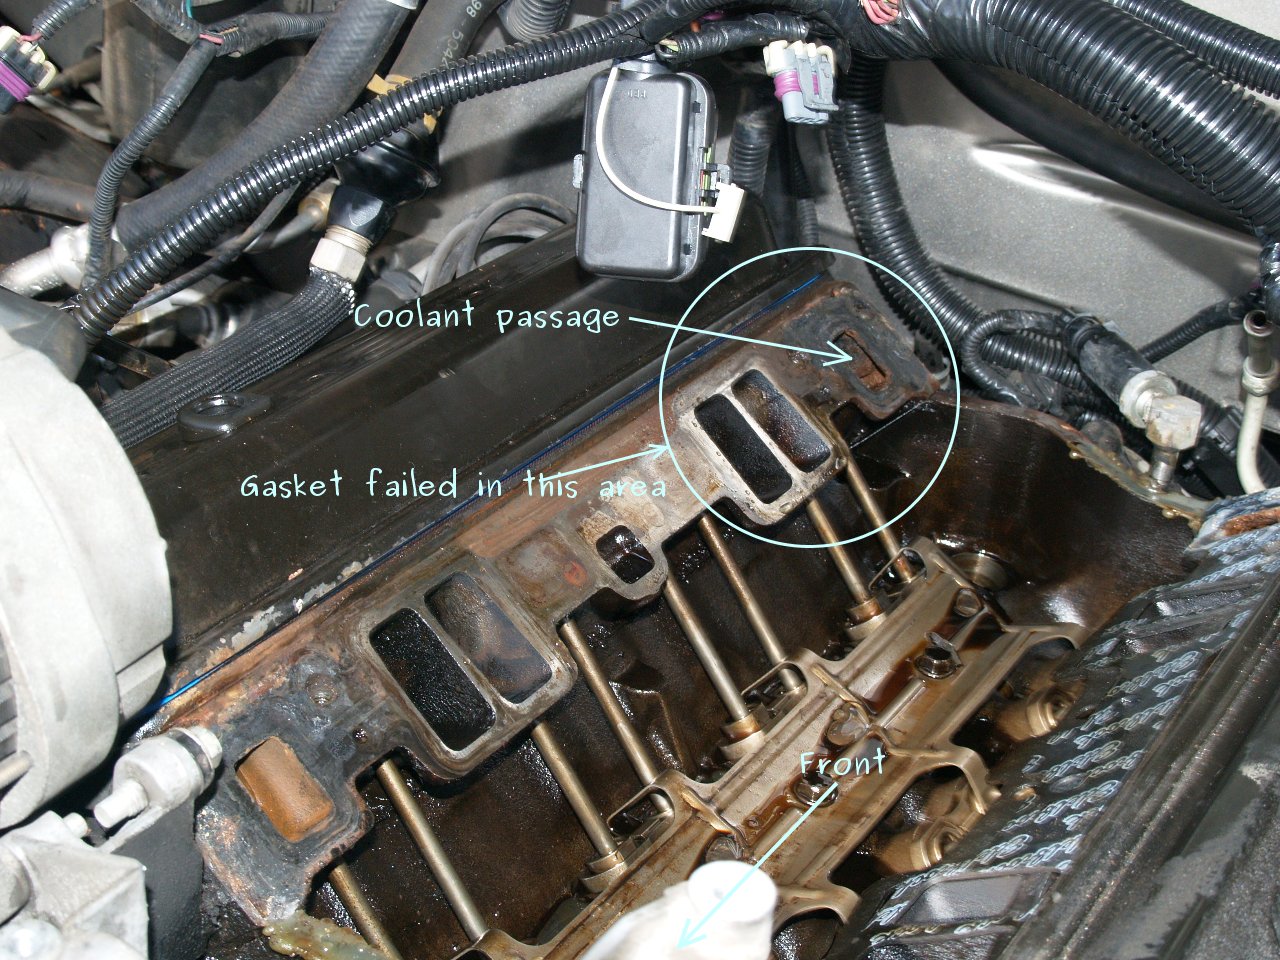 See P330D in engine